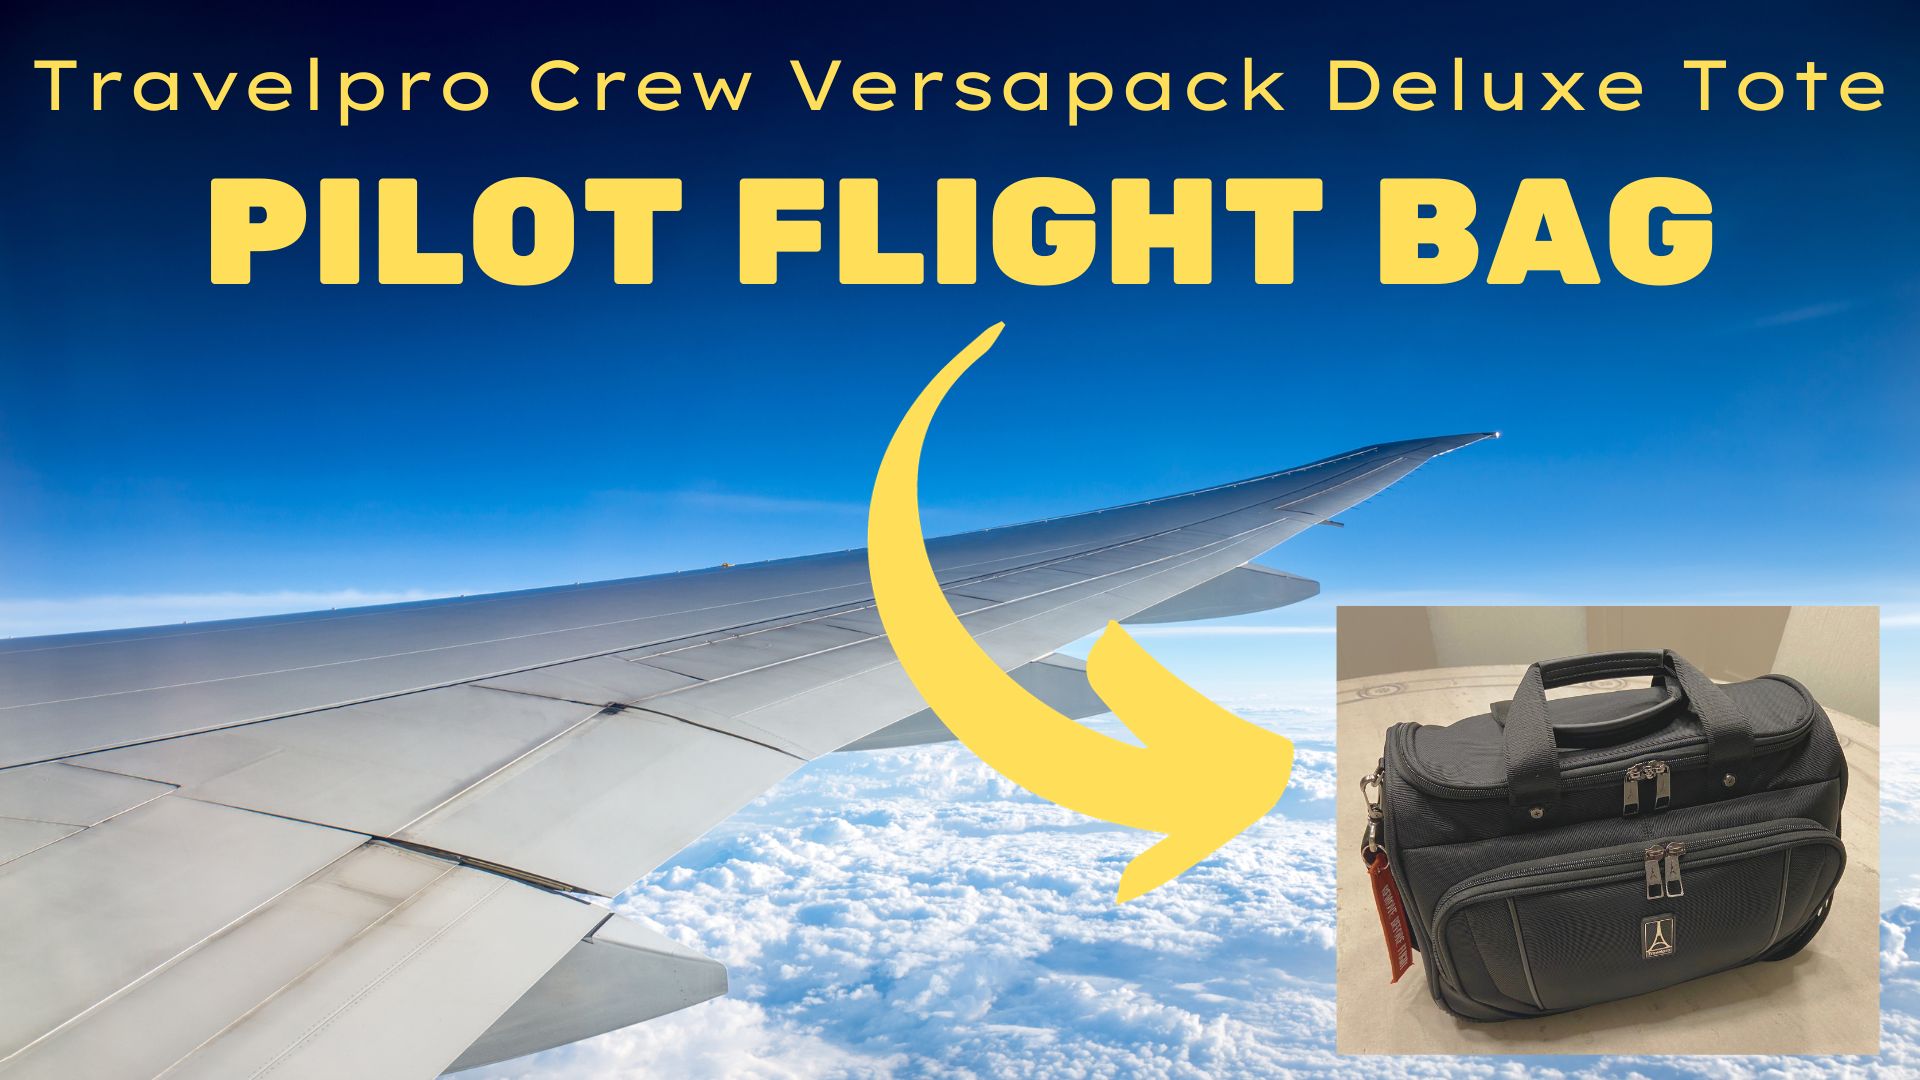 Travelpro Versapack Deluxe Tote As Pilot Flight Bag (Product Review)